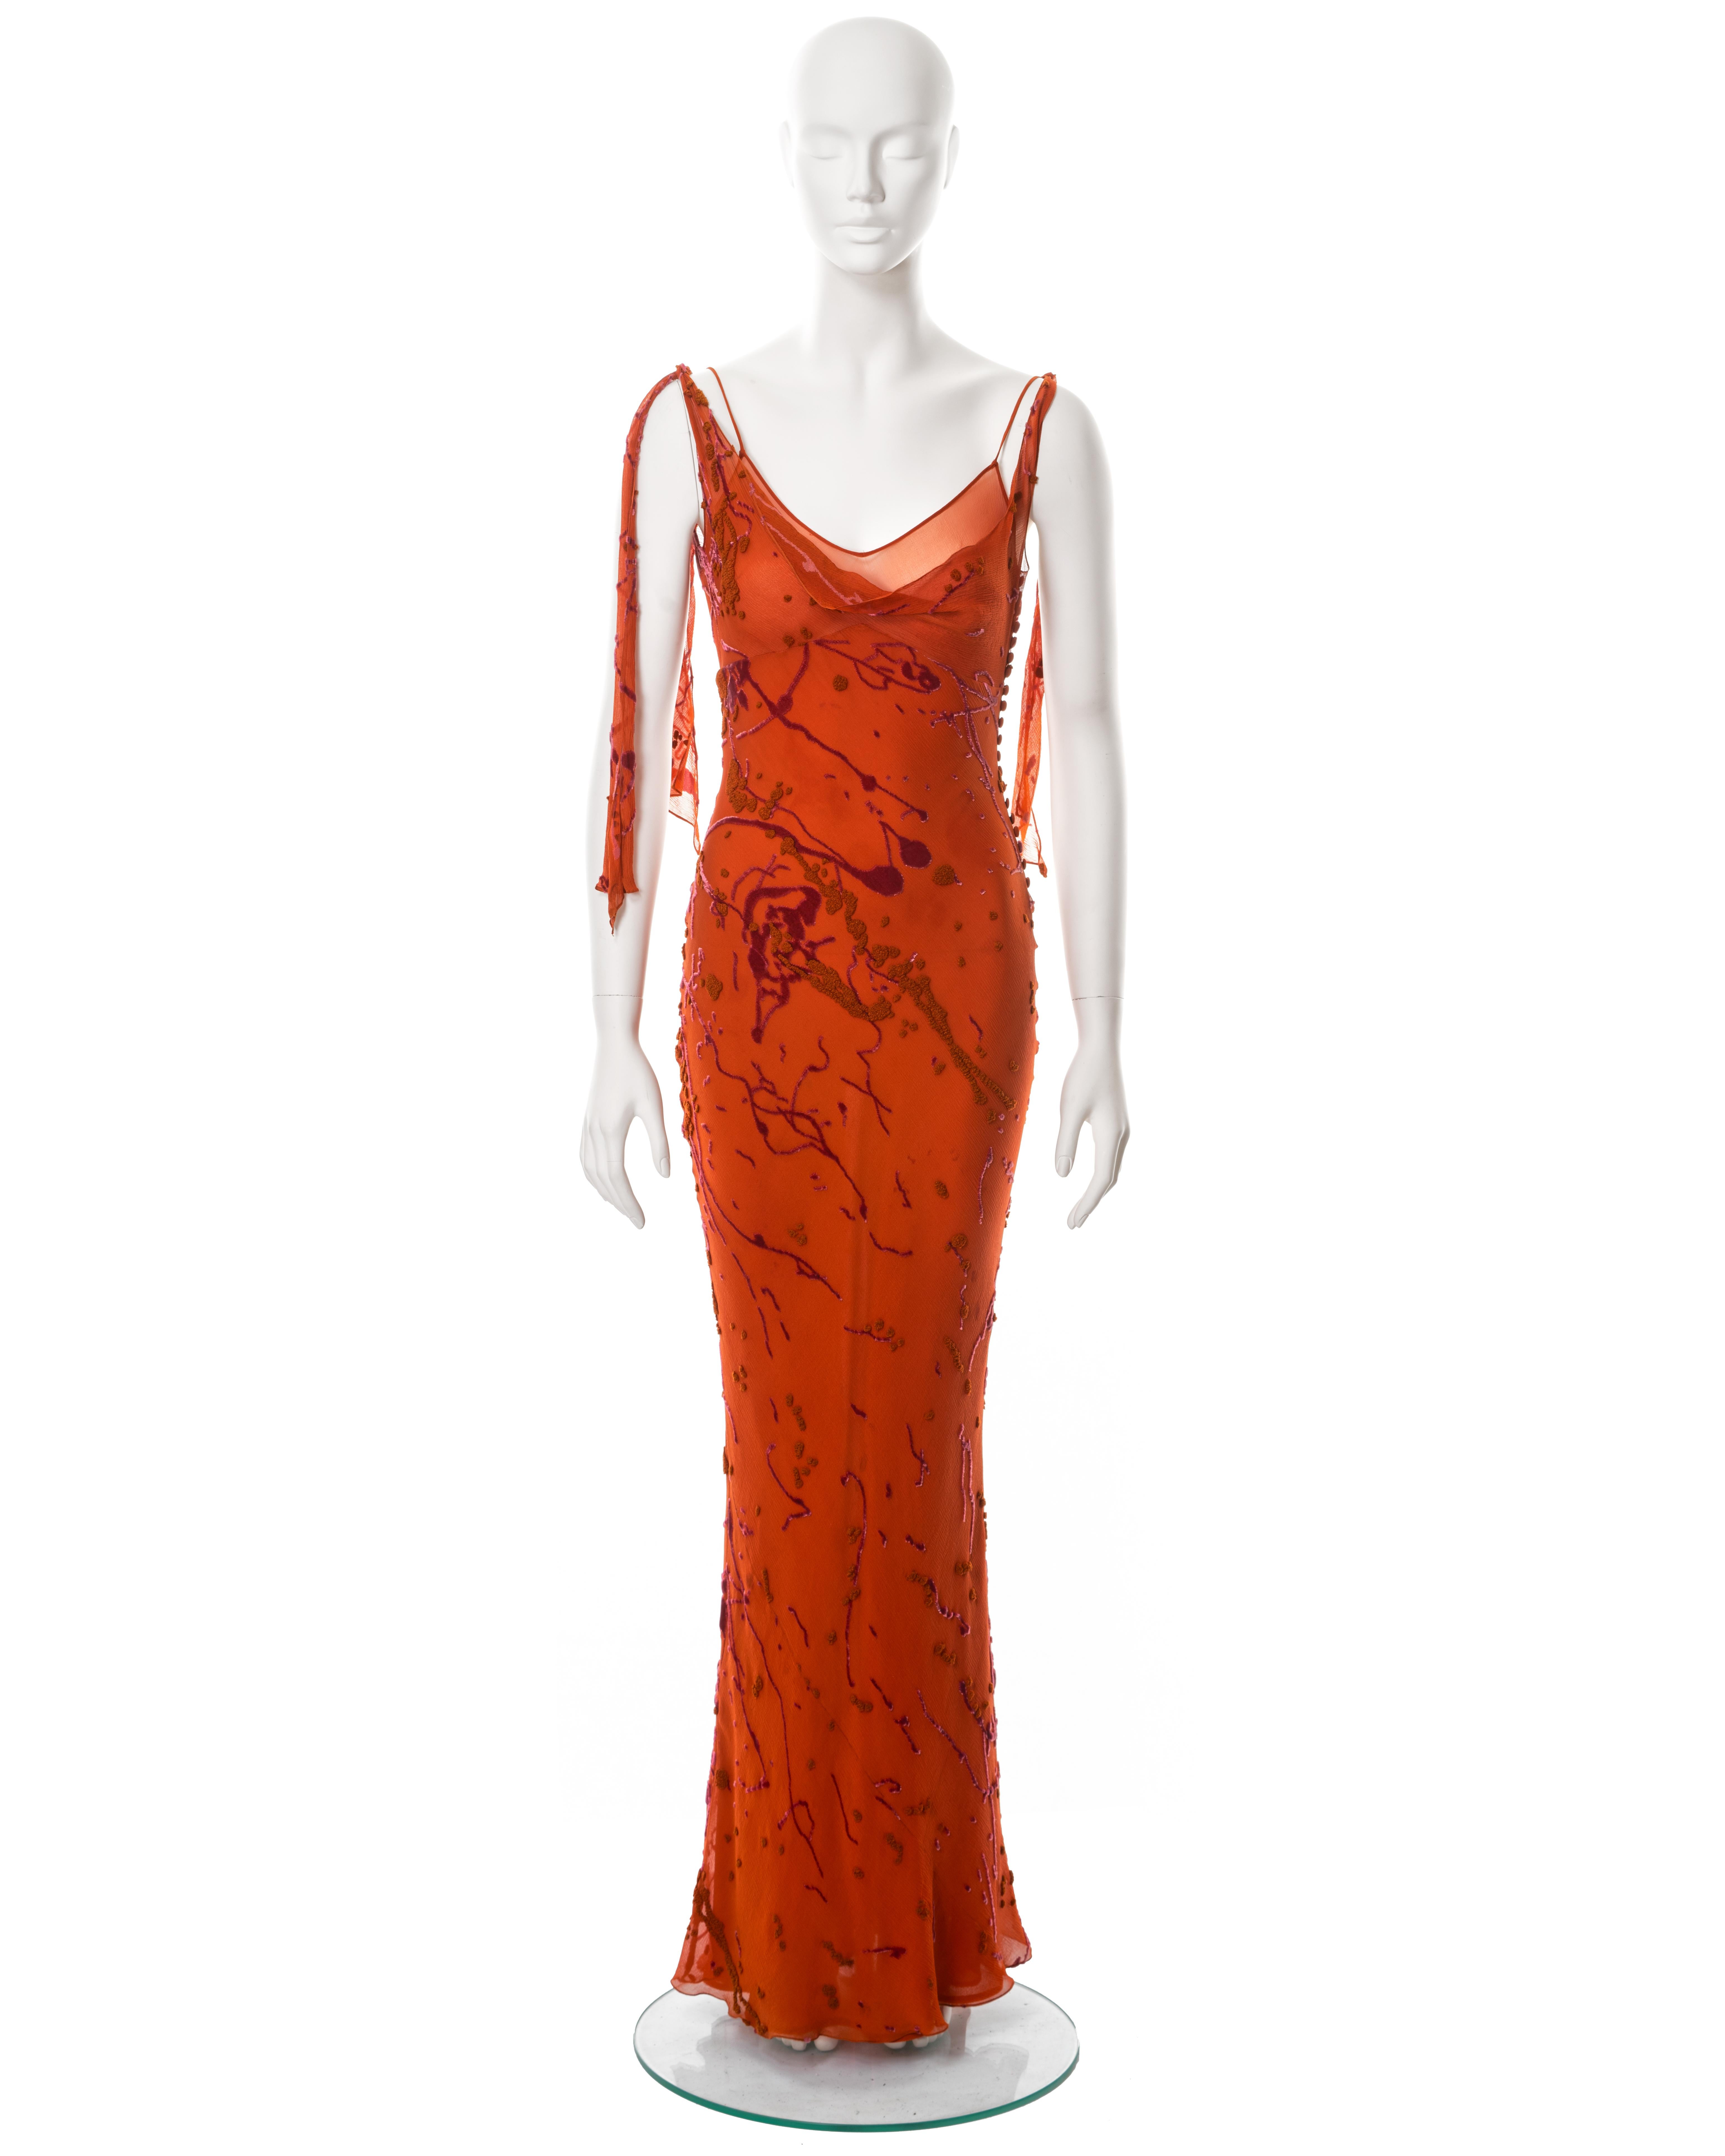 ▪ John Galliano evening dress
▪ Sold by One of a Kind Archive
▪ Fall-Winter 2000
▪ Constructed from orange bias-cut crinkled silk devoré 
▪ Velvet and French-knot embroidery paint splatter motifs
▪ Silk chiffon underdress 
▪ Cowl neck
▪ 3 Ties knot